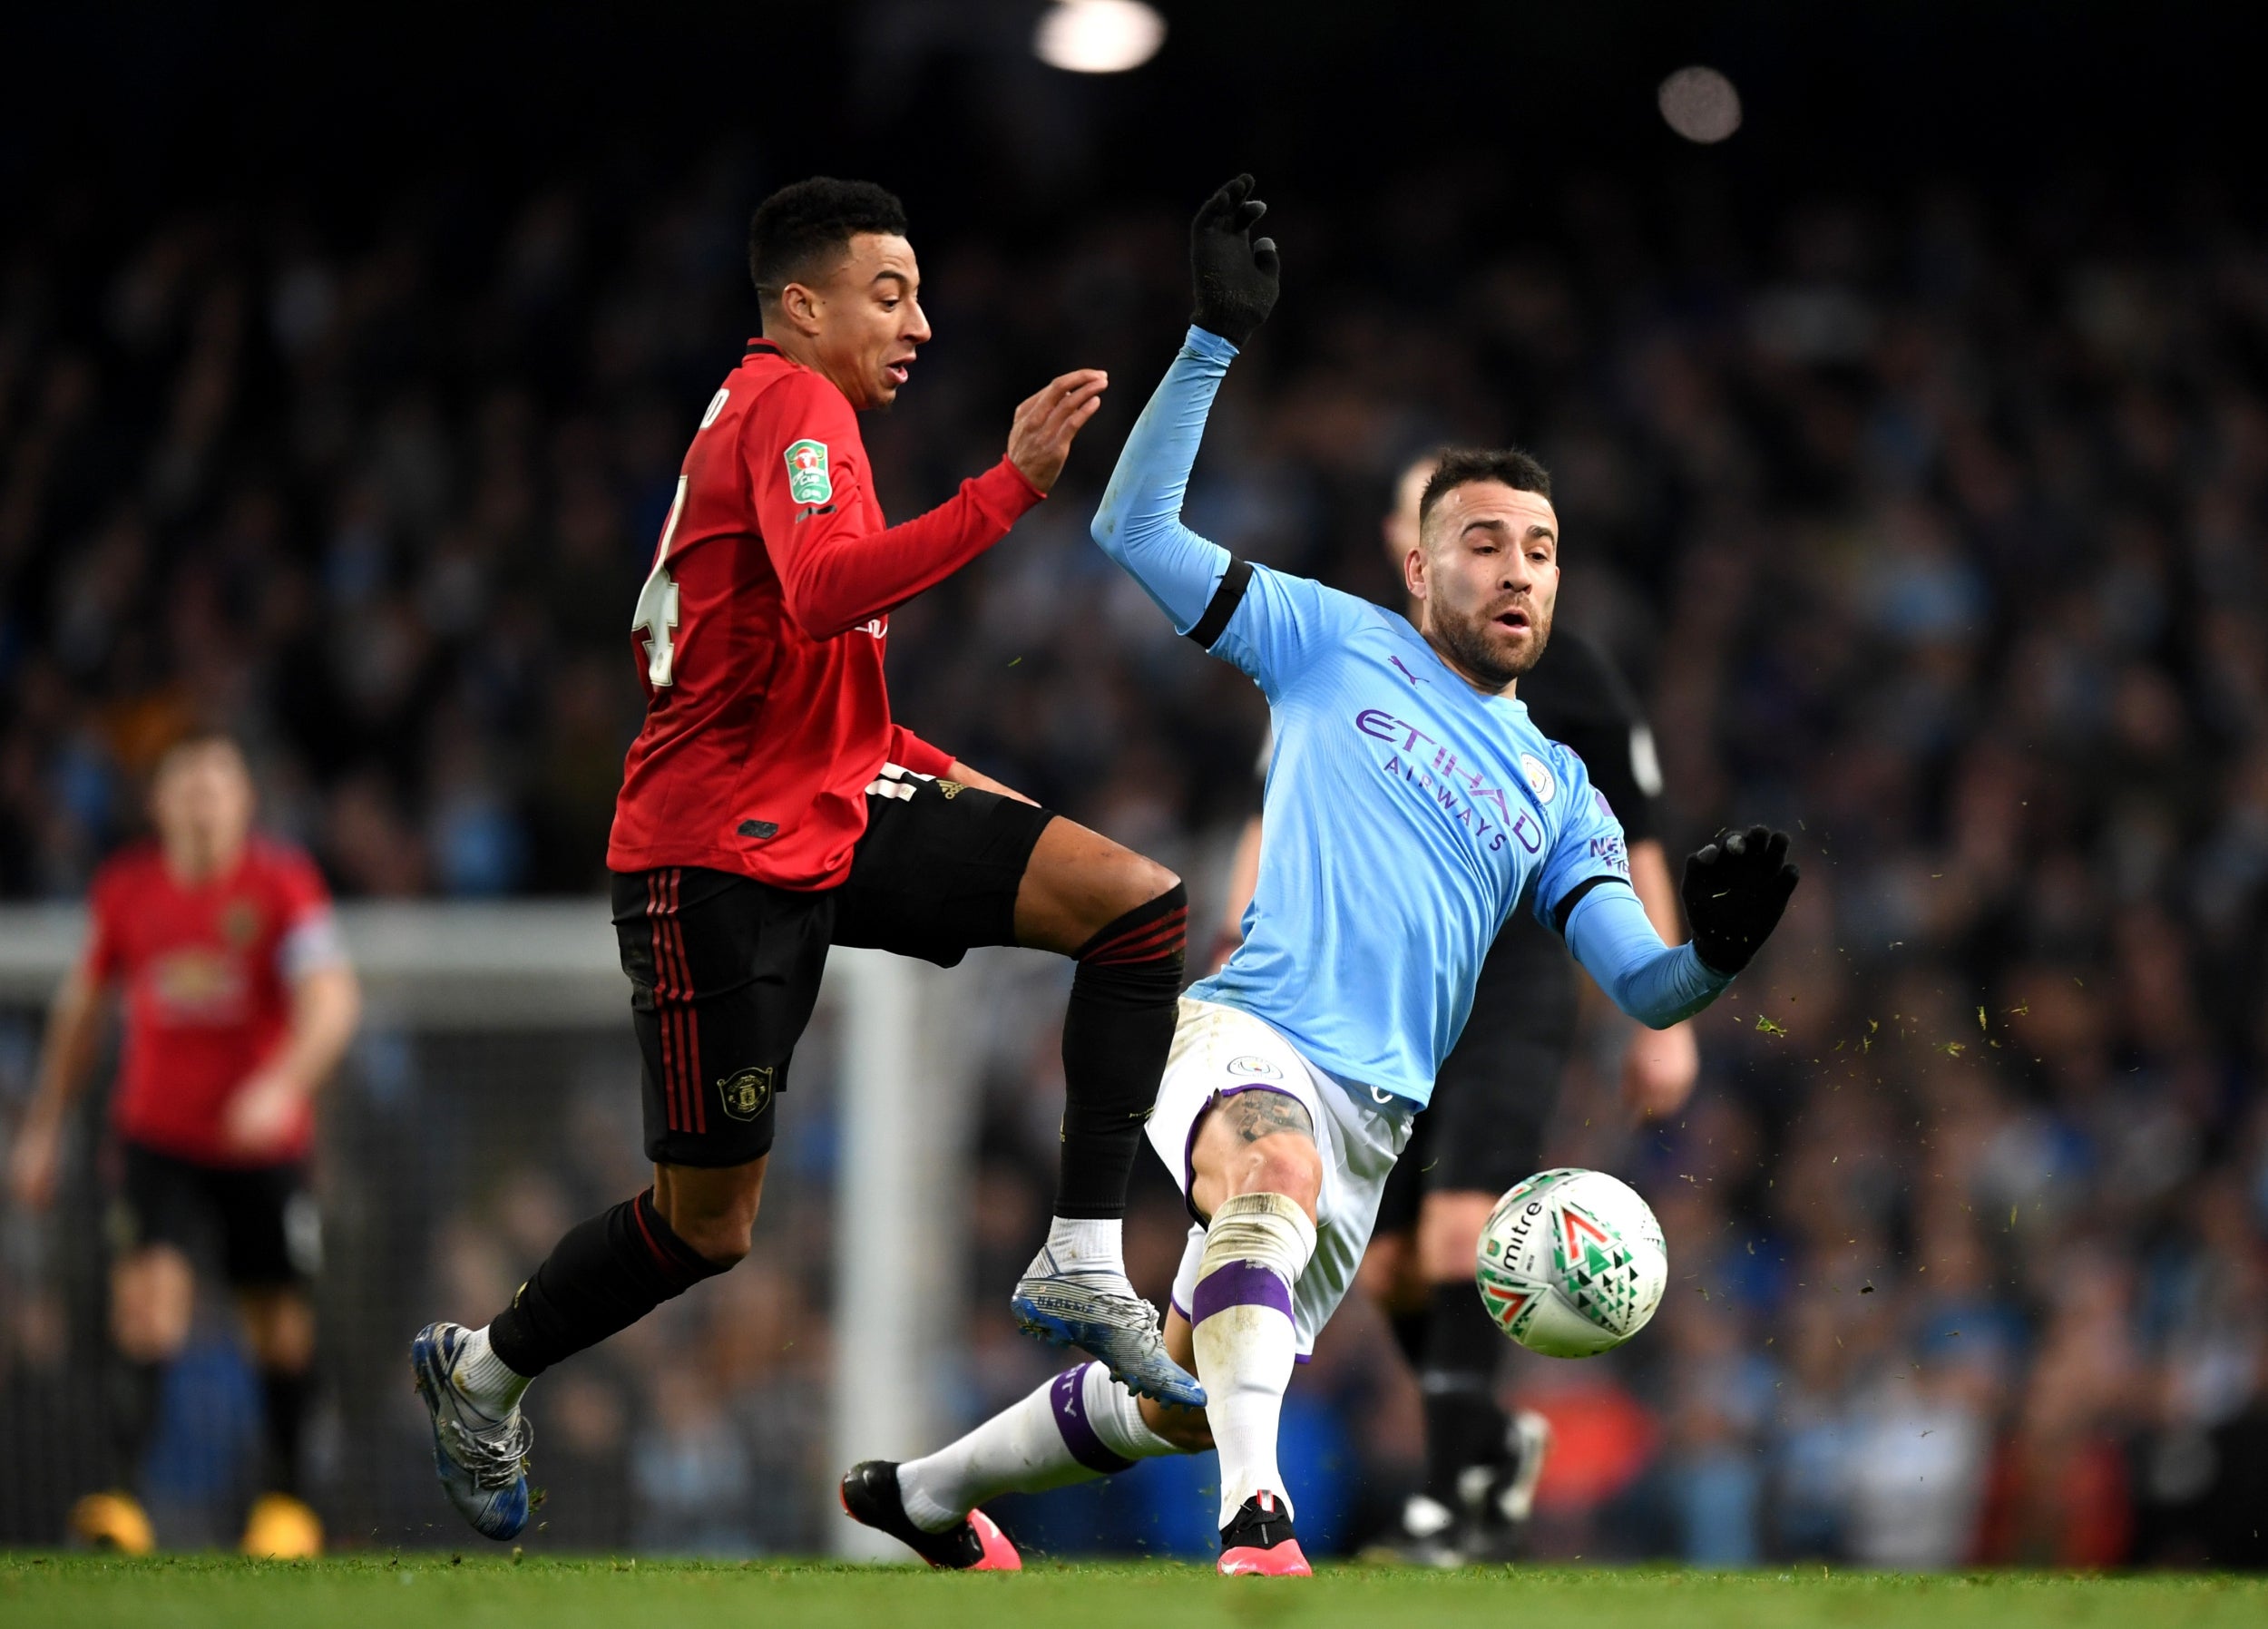 Manchester derby result: United fall short of miracle comeback as City